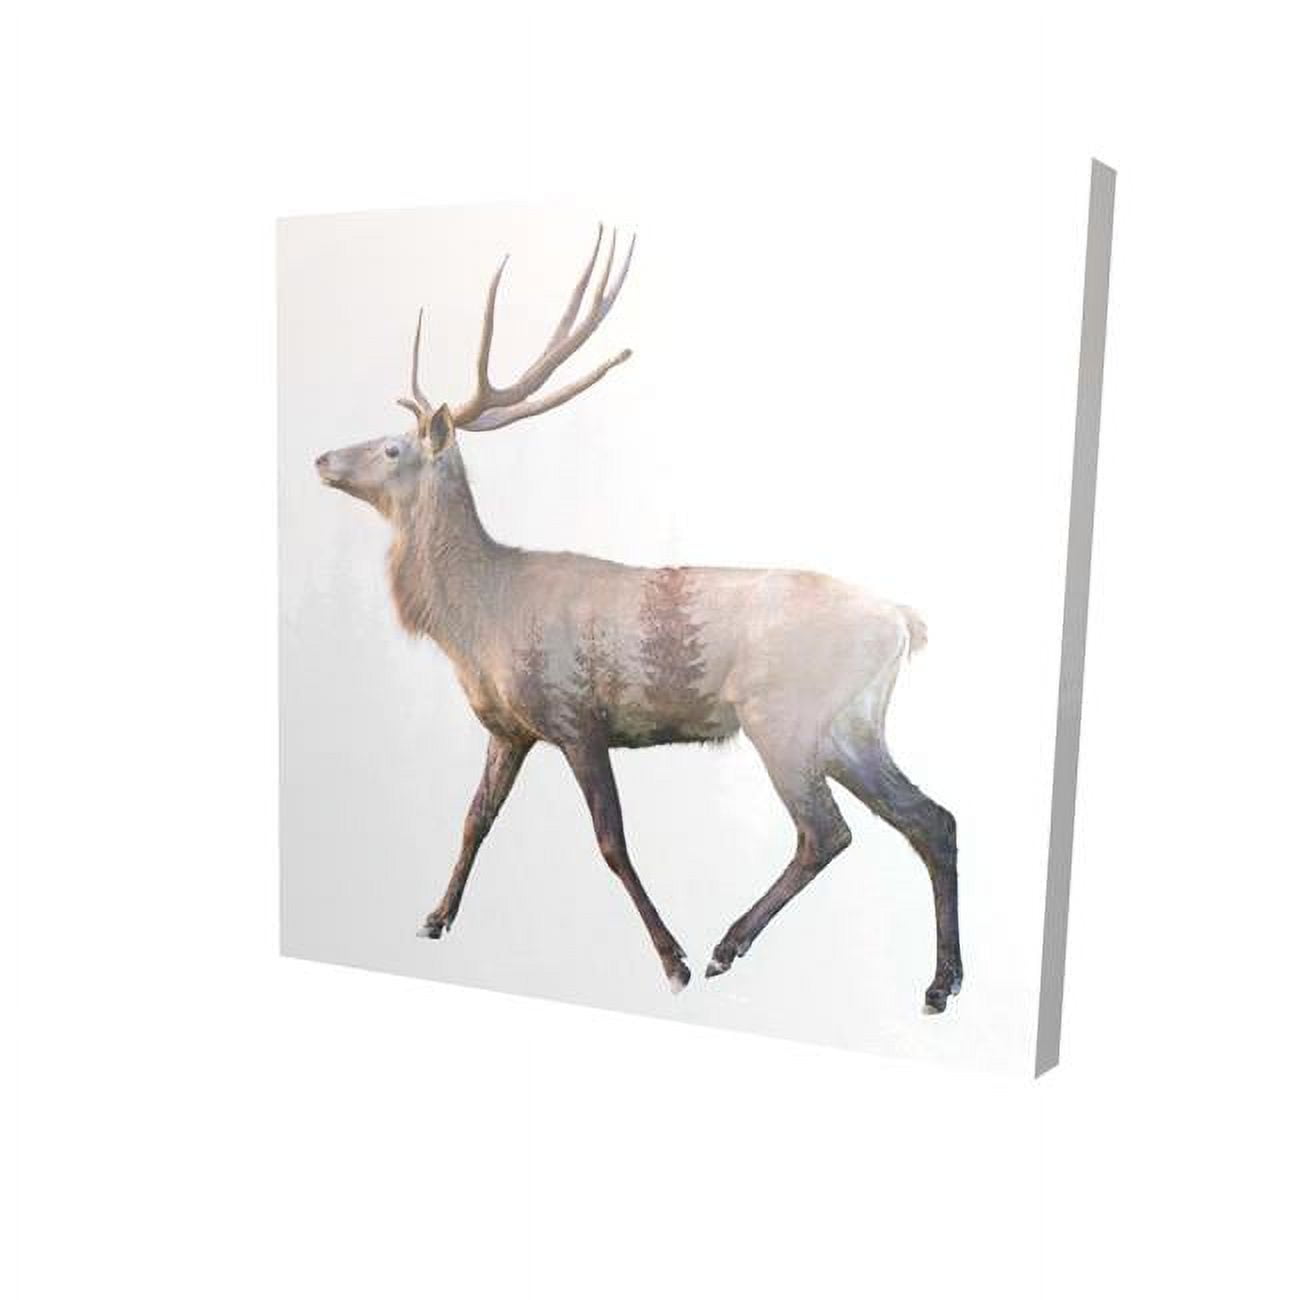 Begin Home Decor 2080-1616-AN221 16 x 16 in. Deer & Forest-Print on Canvas